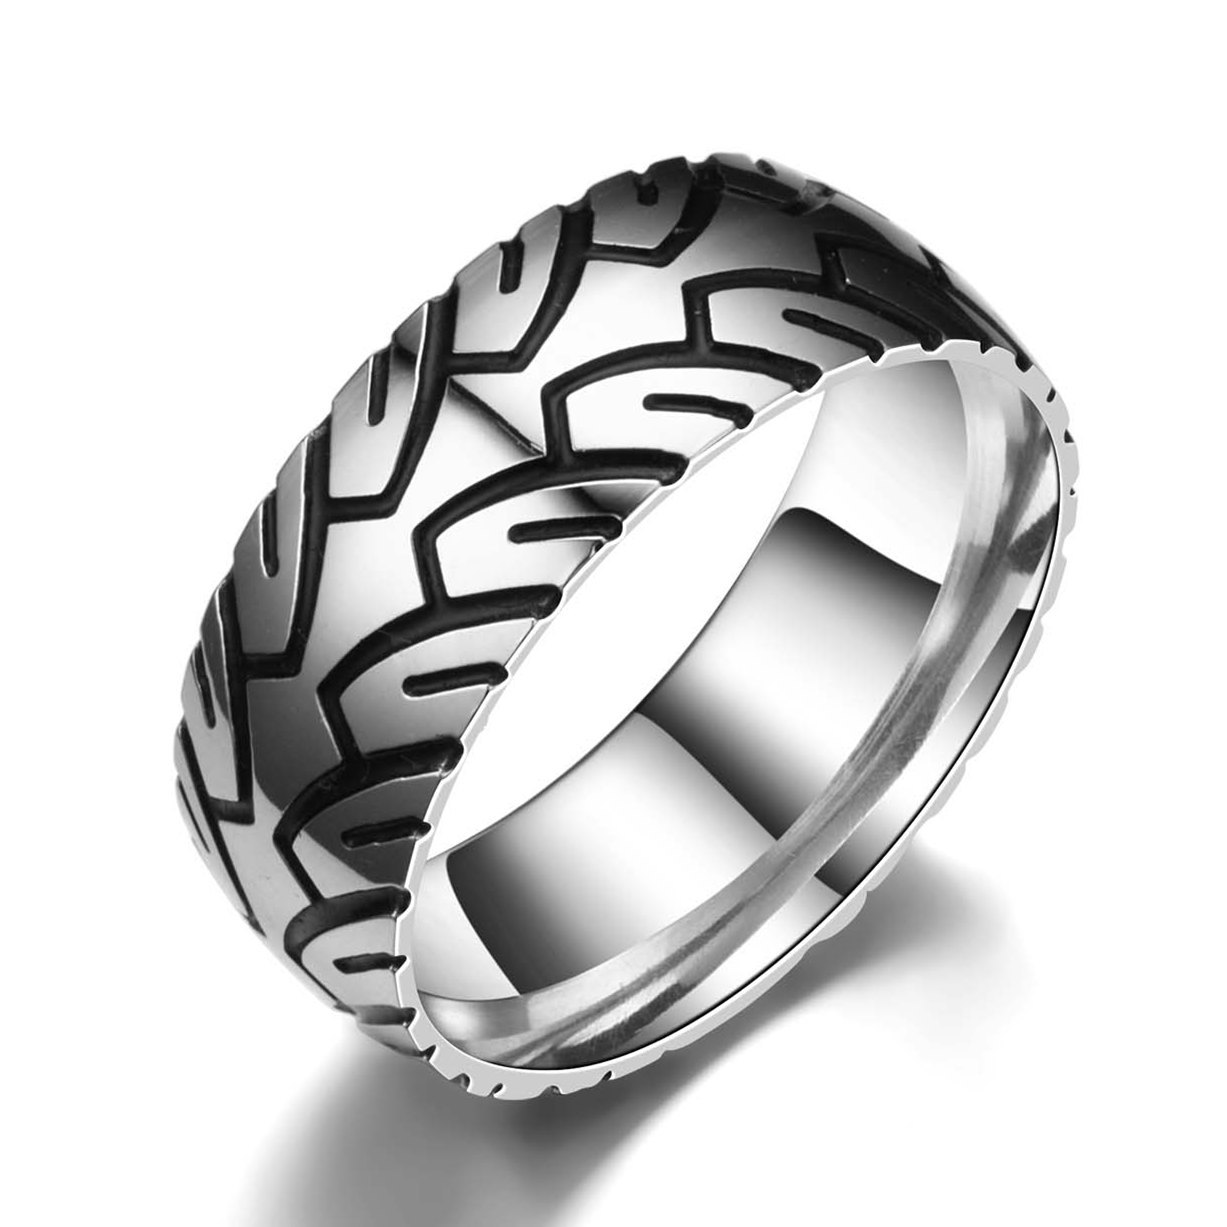 Buy Car Tire Ring Online In India - Etsy India